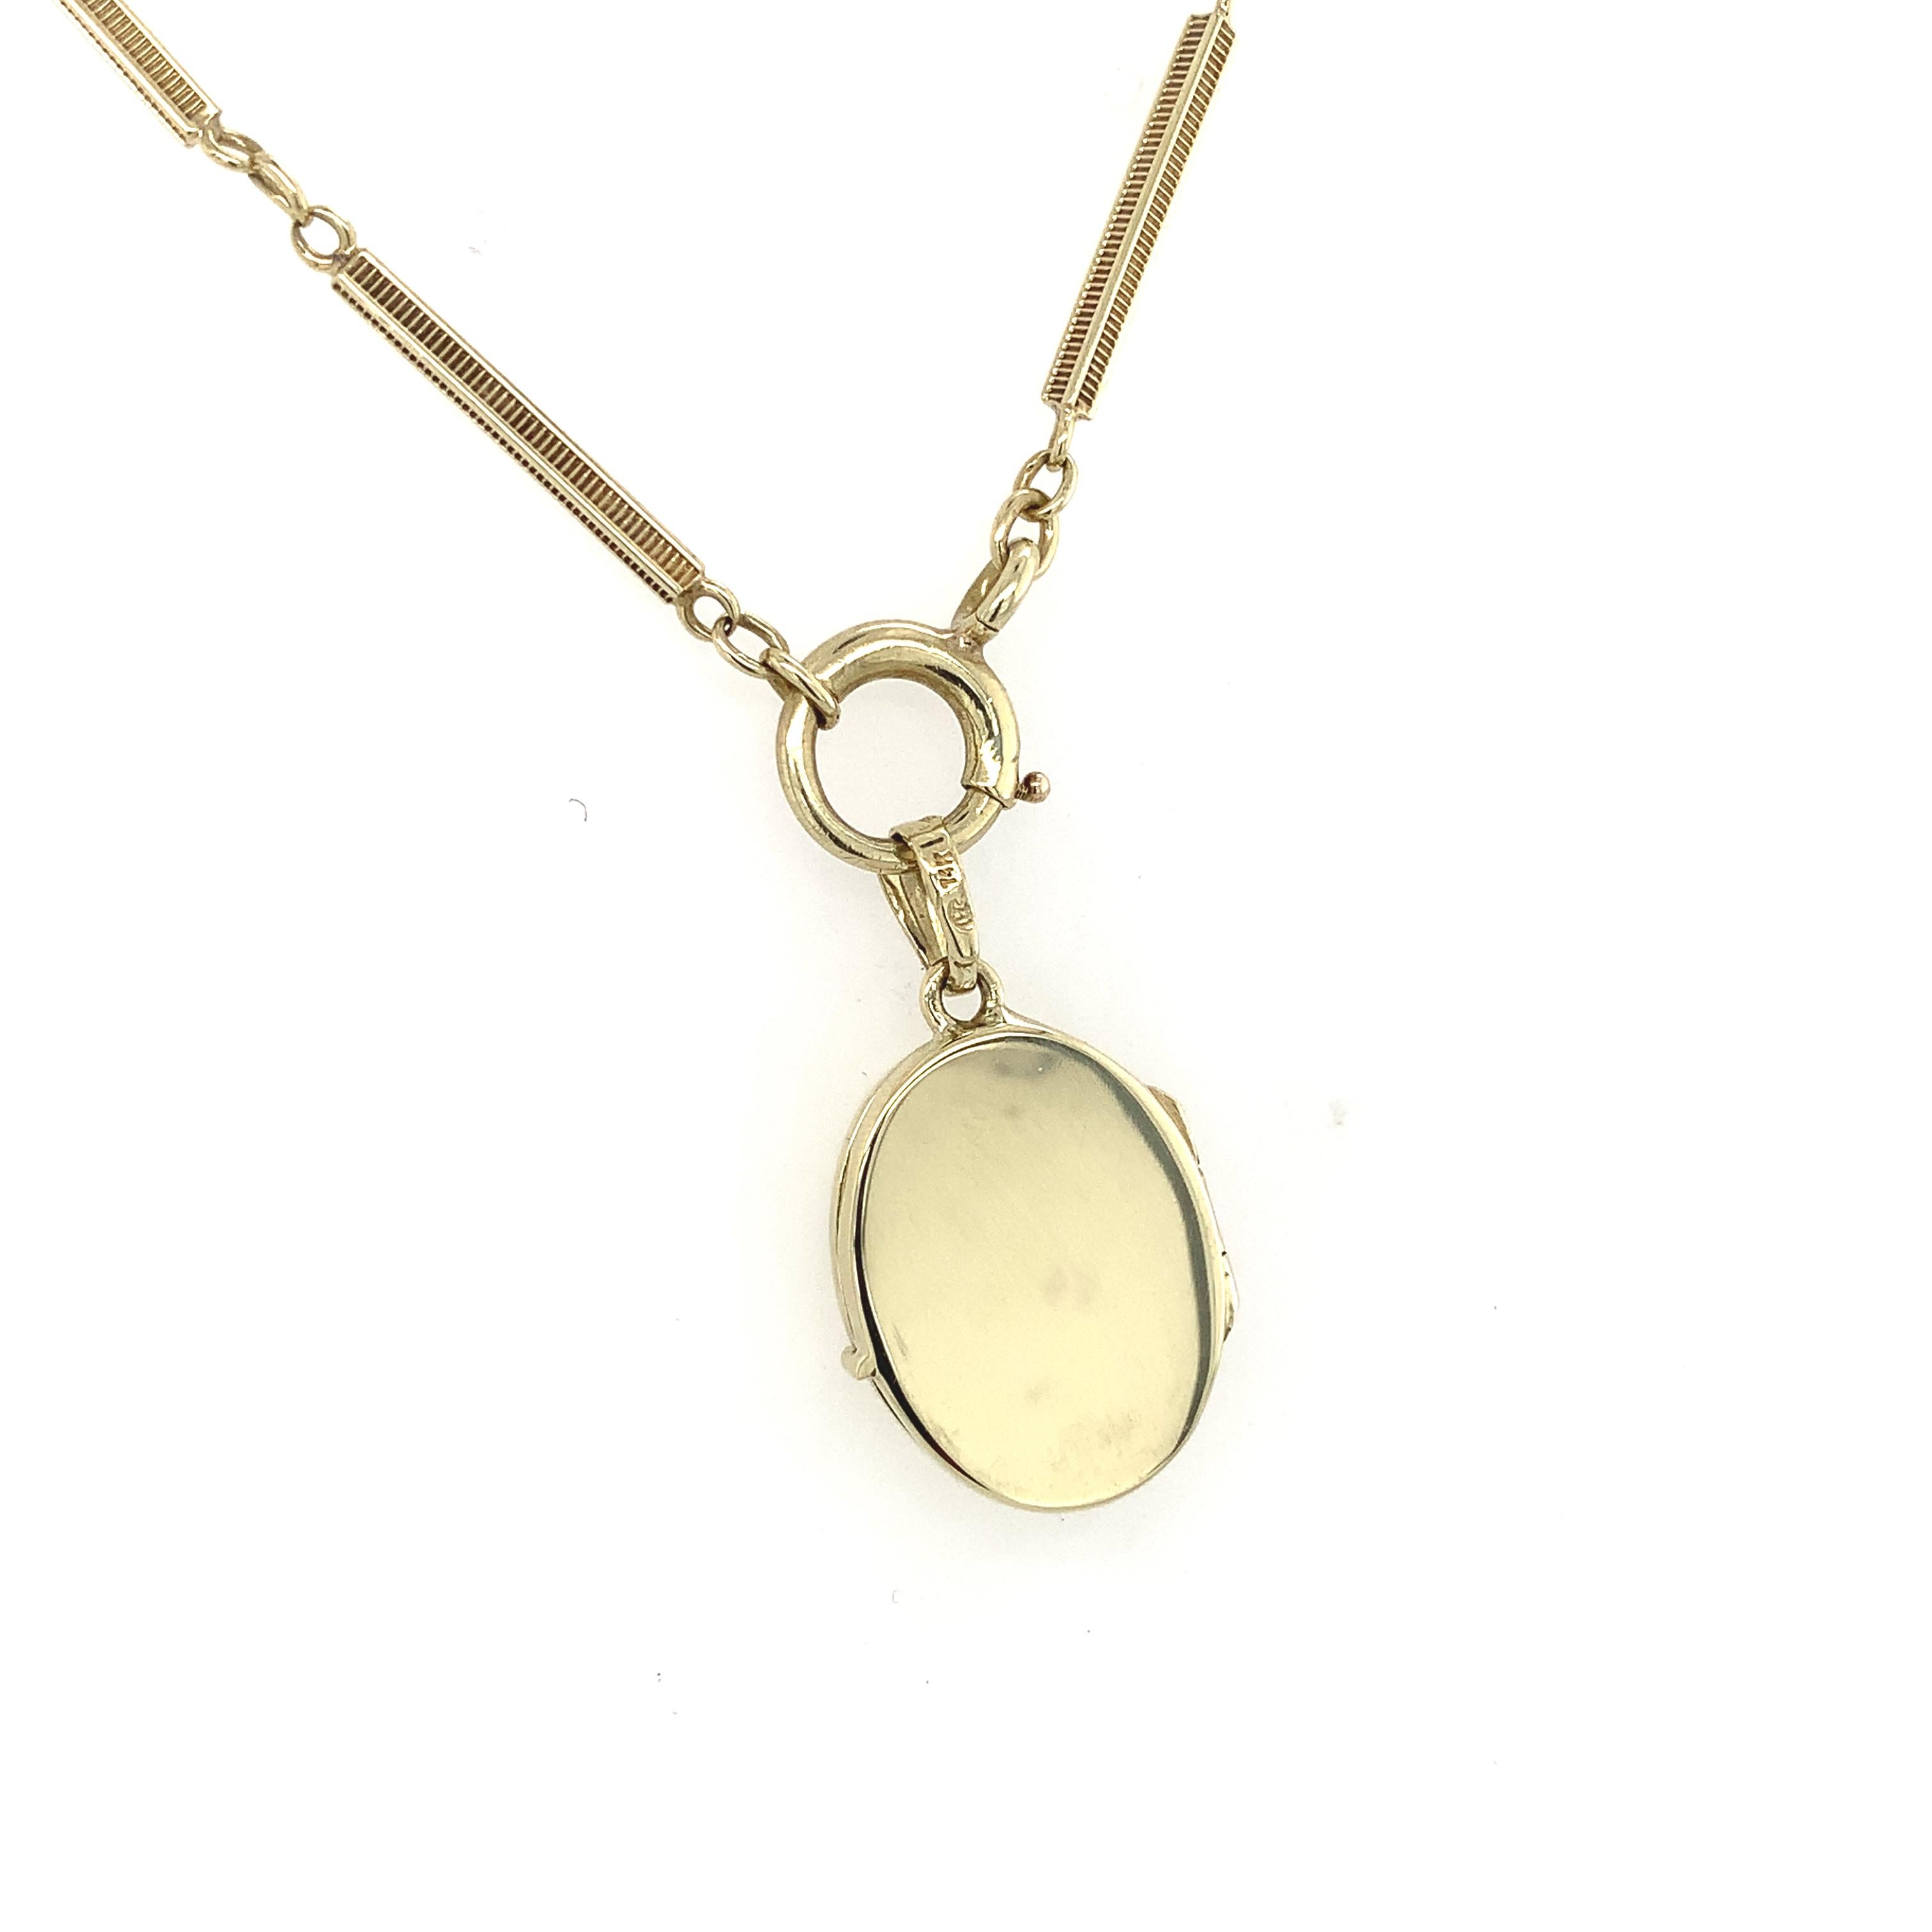 14K yellow gold oval locket with a diamond on a 14K yellow gold fancy bar link chain. The locket measures 15/16